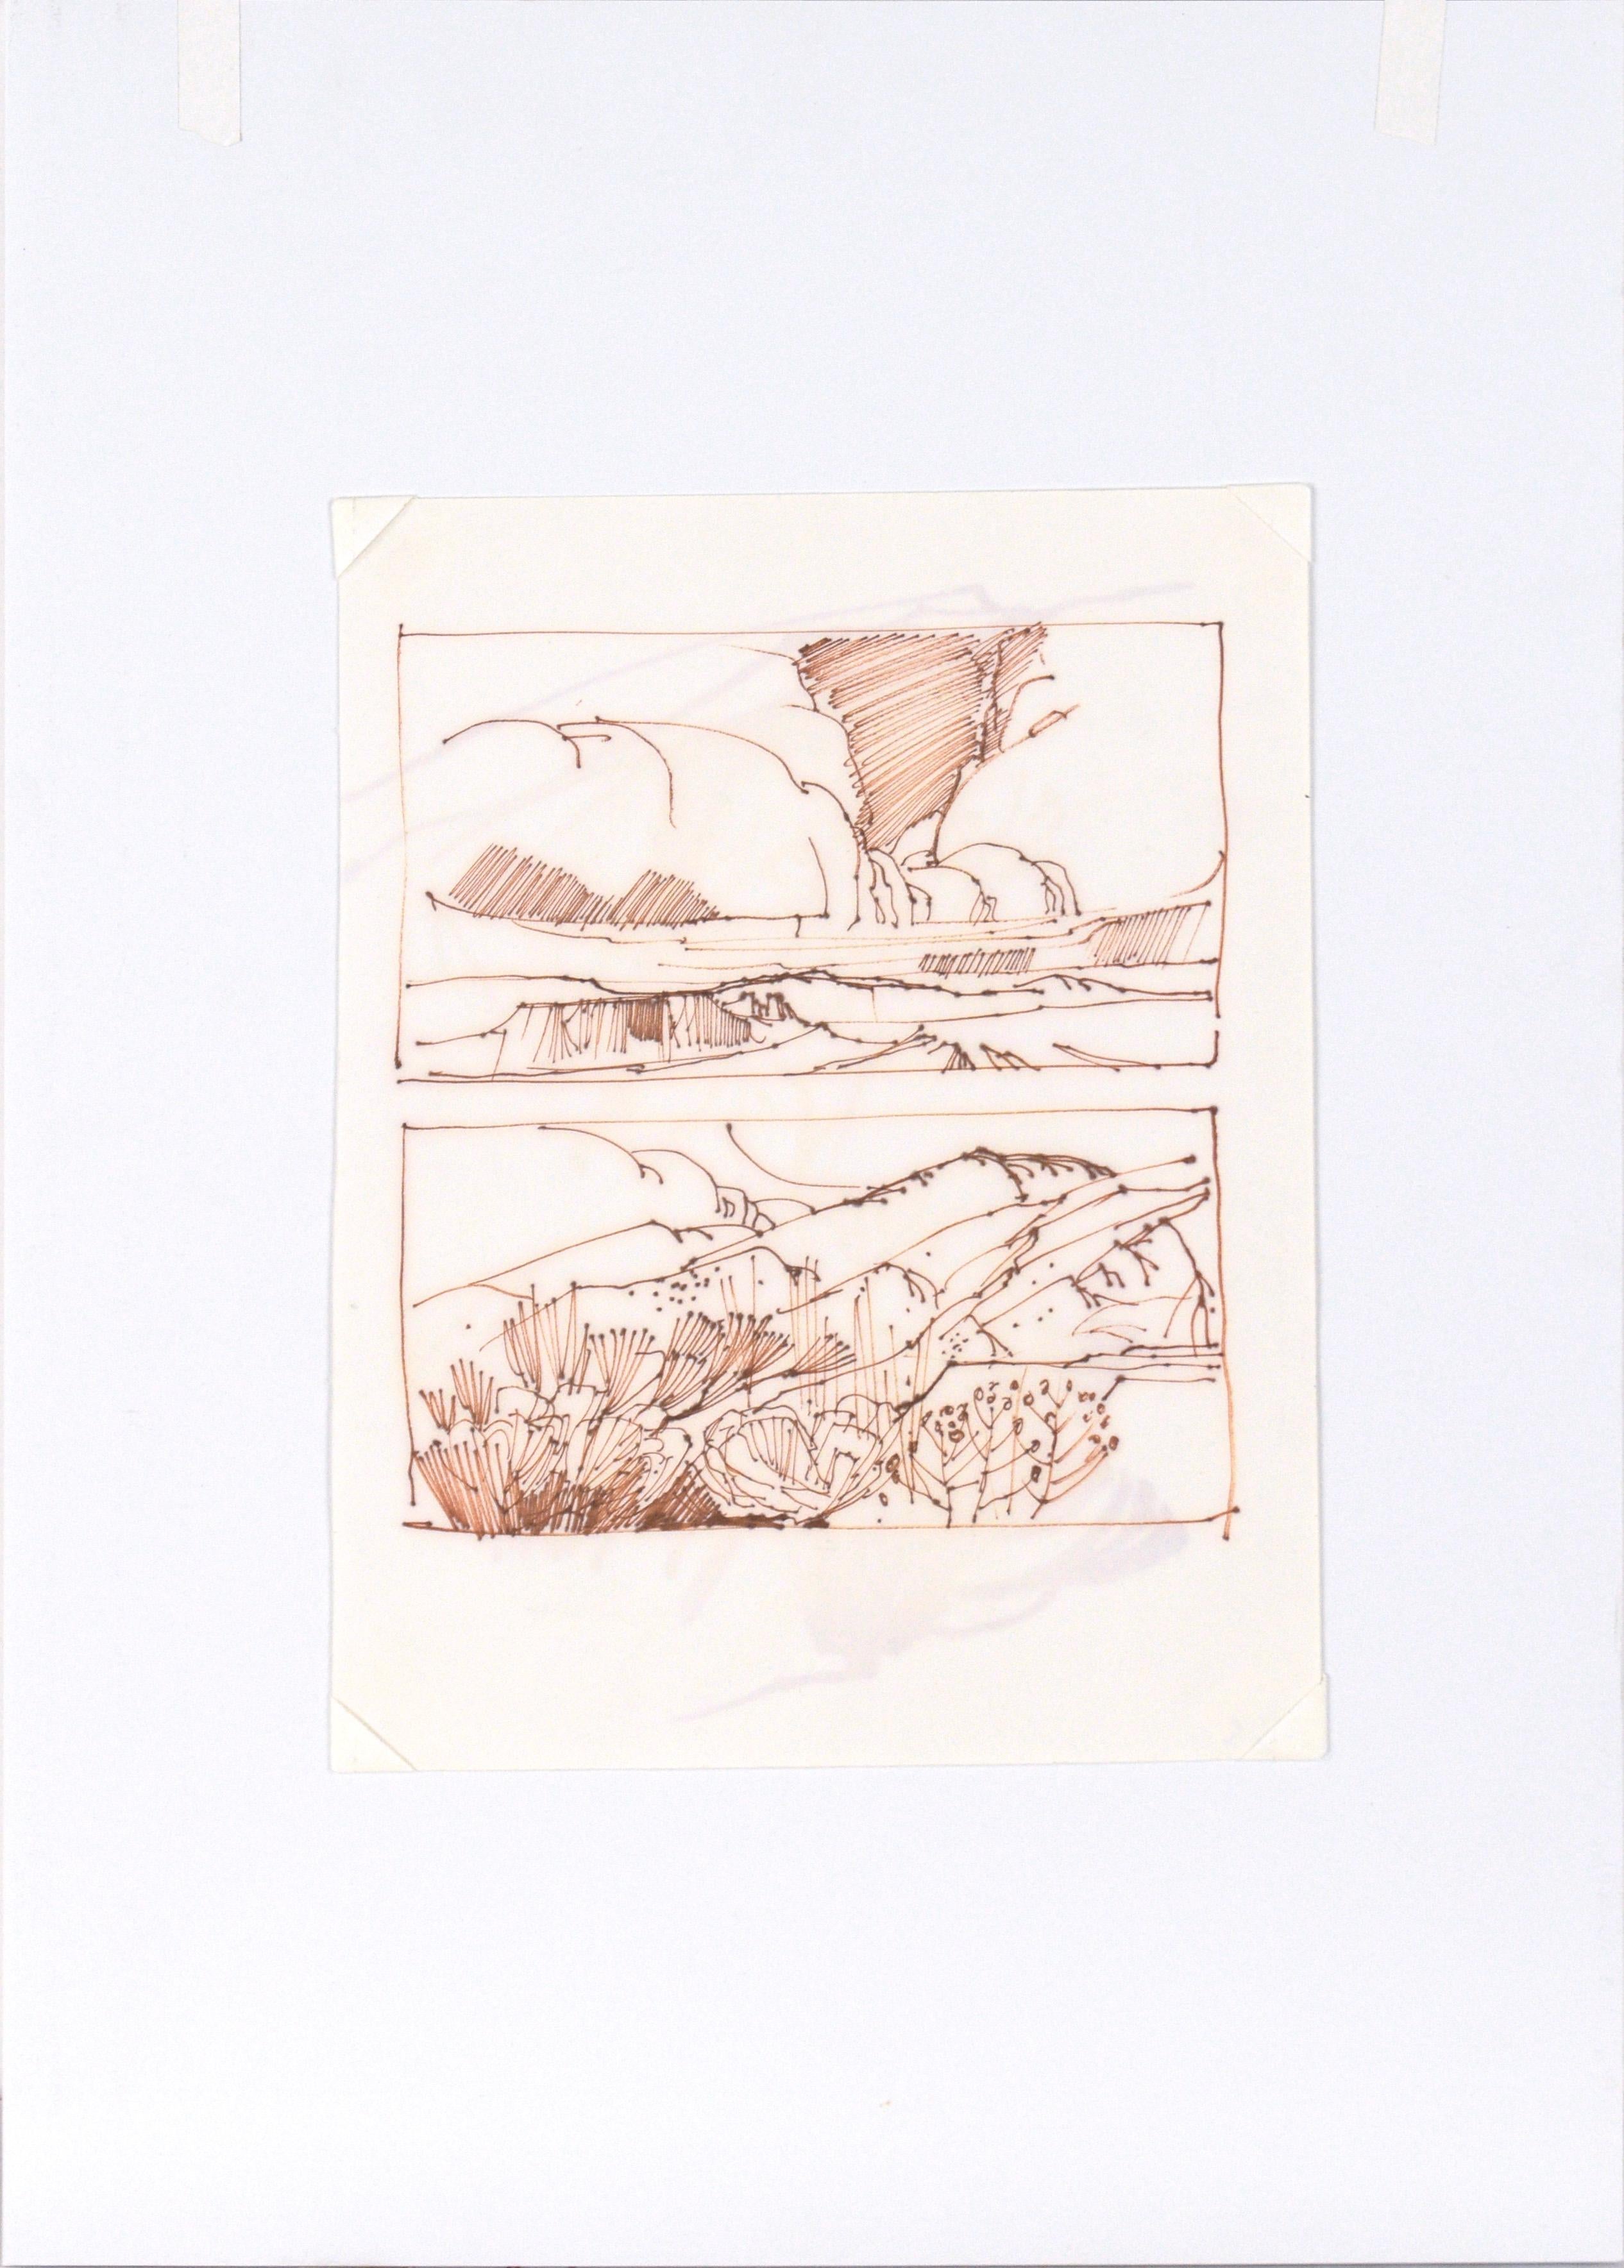 Two High Desert Landscapes - Line Drawing in Sepia-Toned Ink on Paper For Sale 3